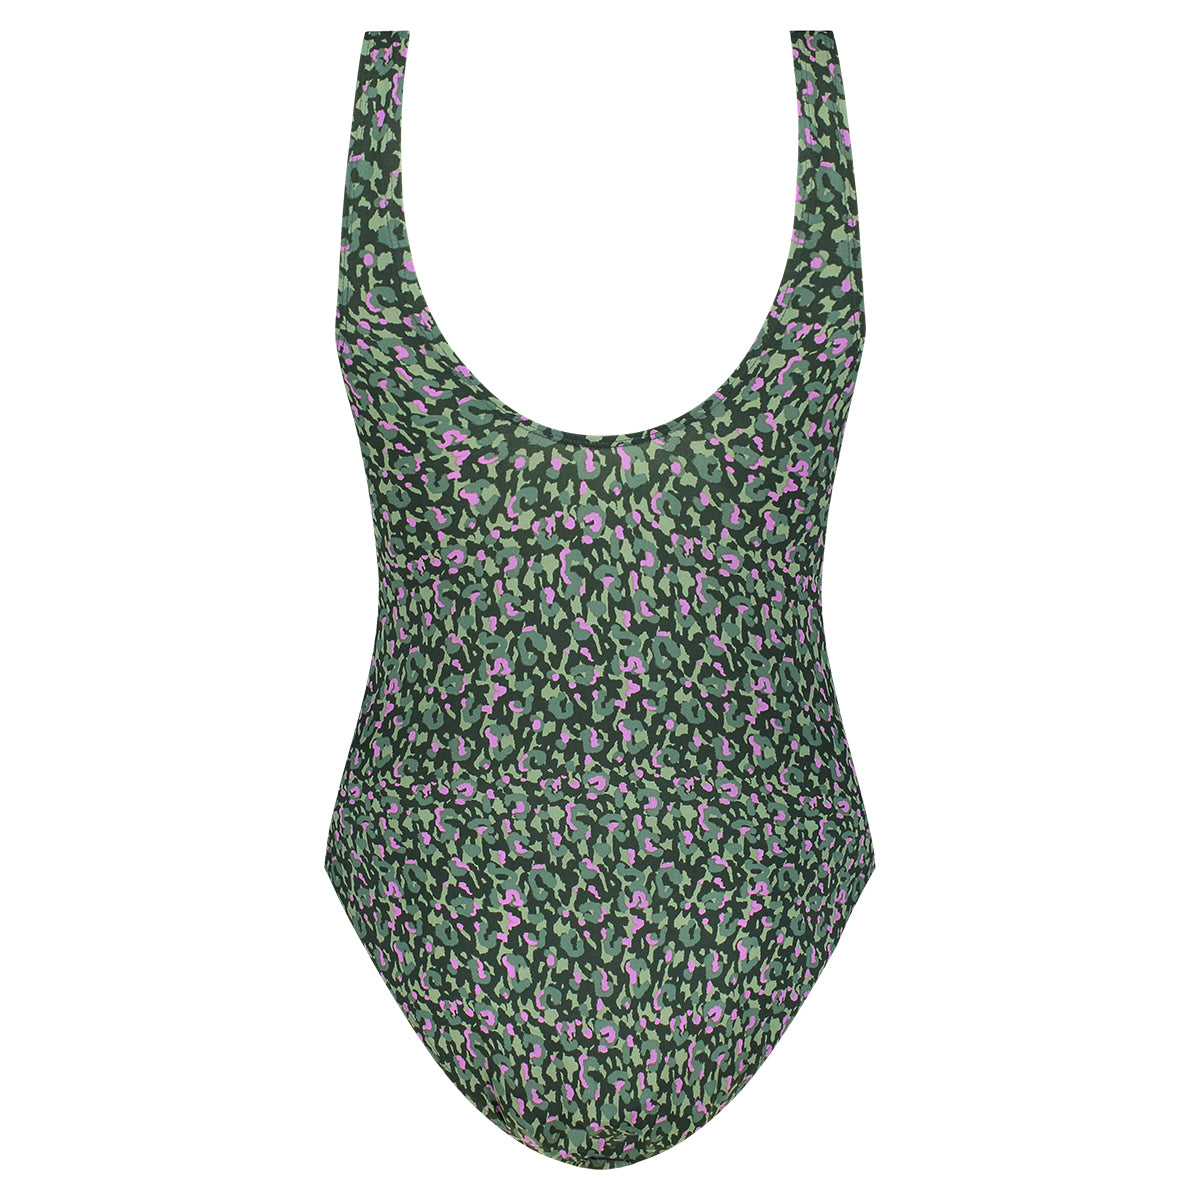 Swimsuit  lining cup 60007 5042 leopard print